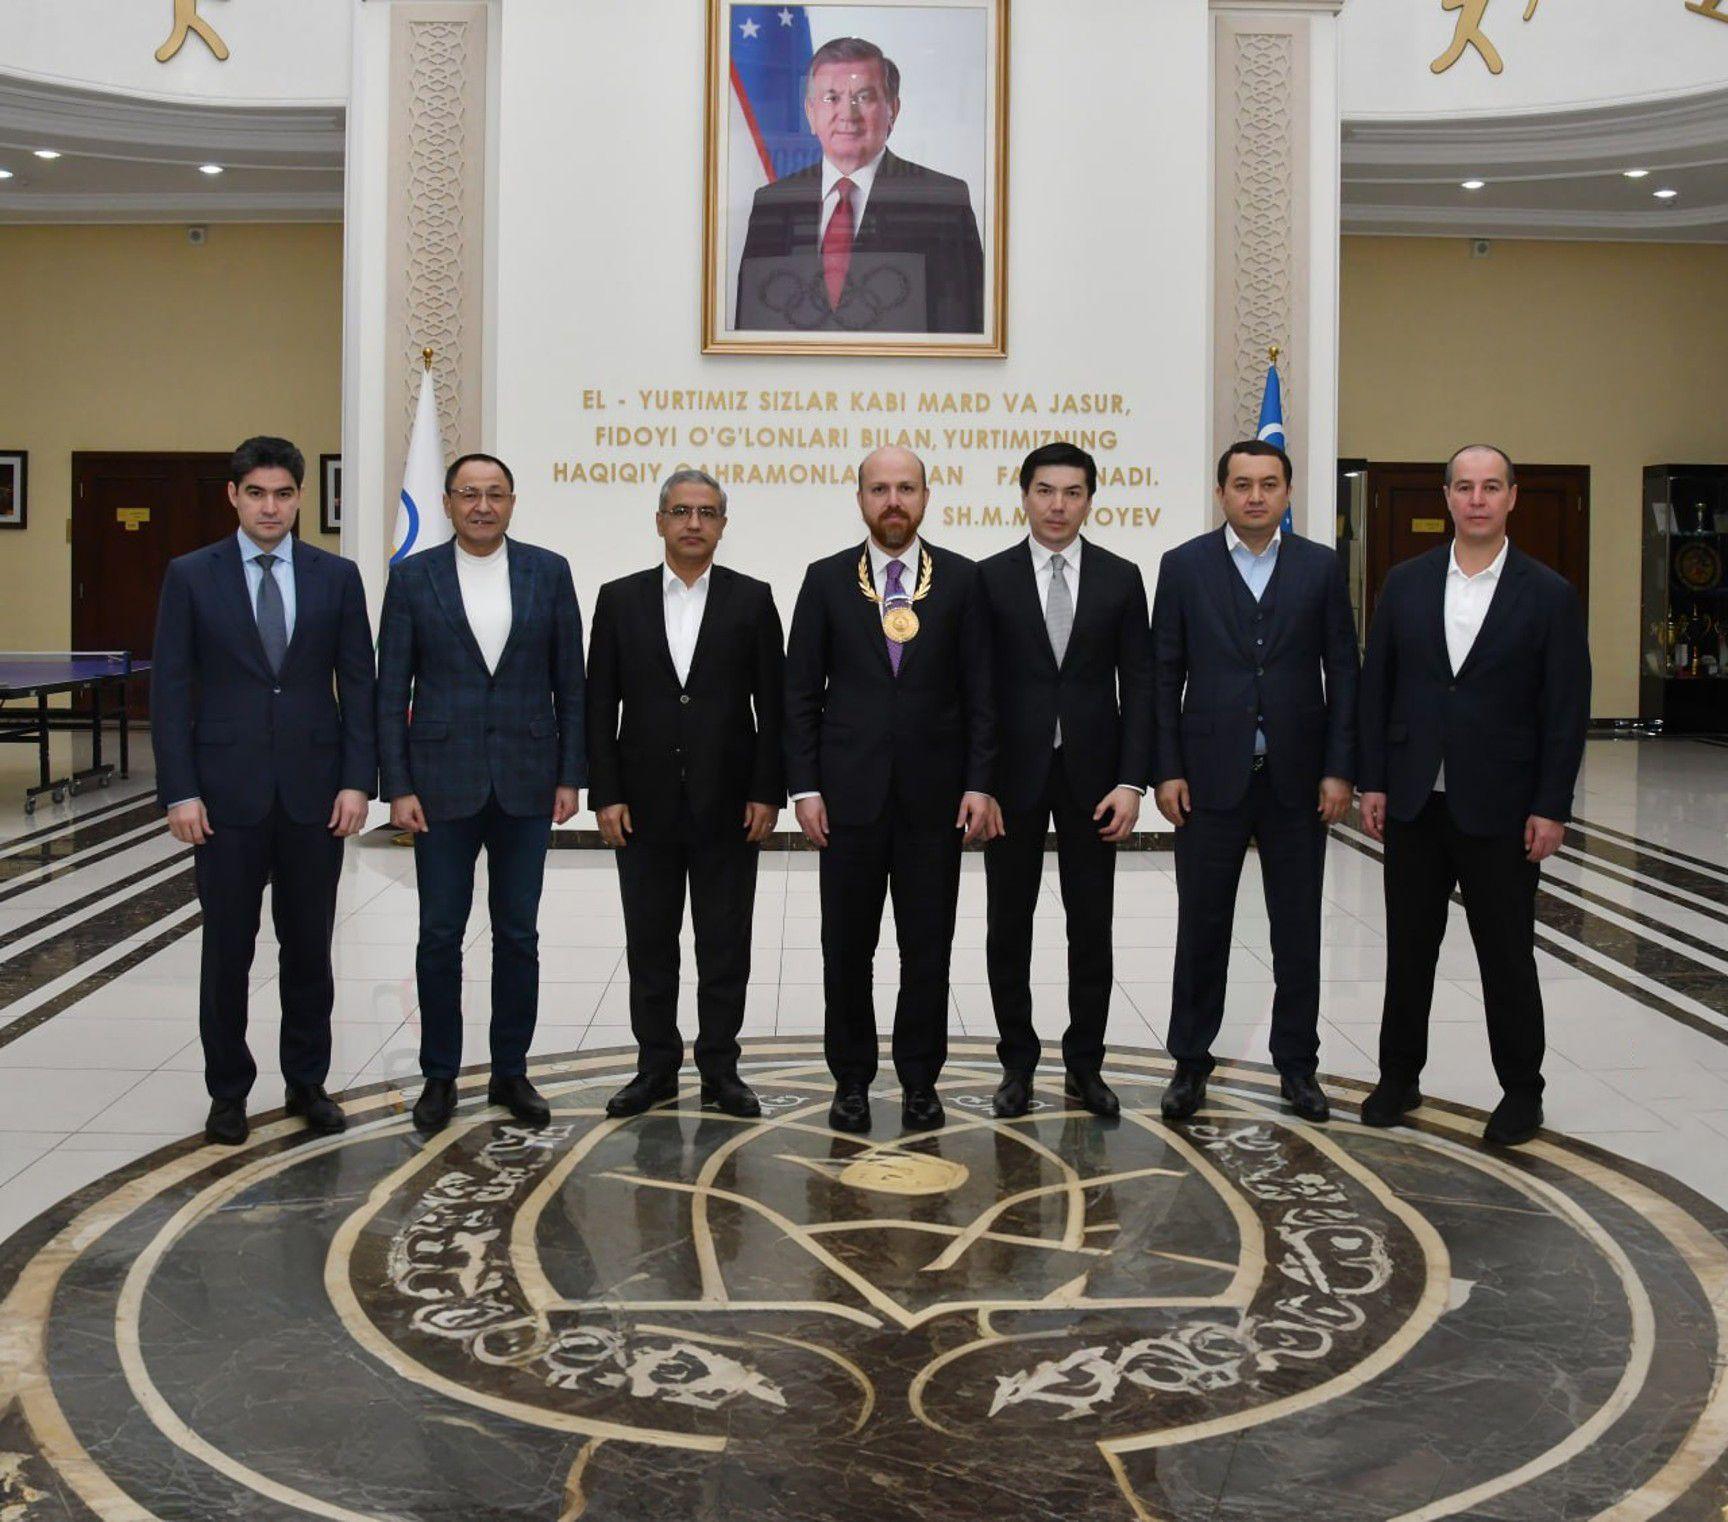 Uzbekistan discussed new stages of cooperation with WEC President